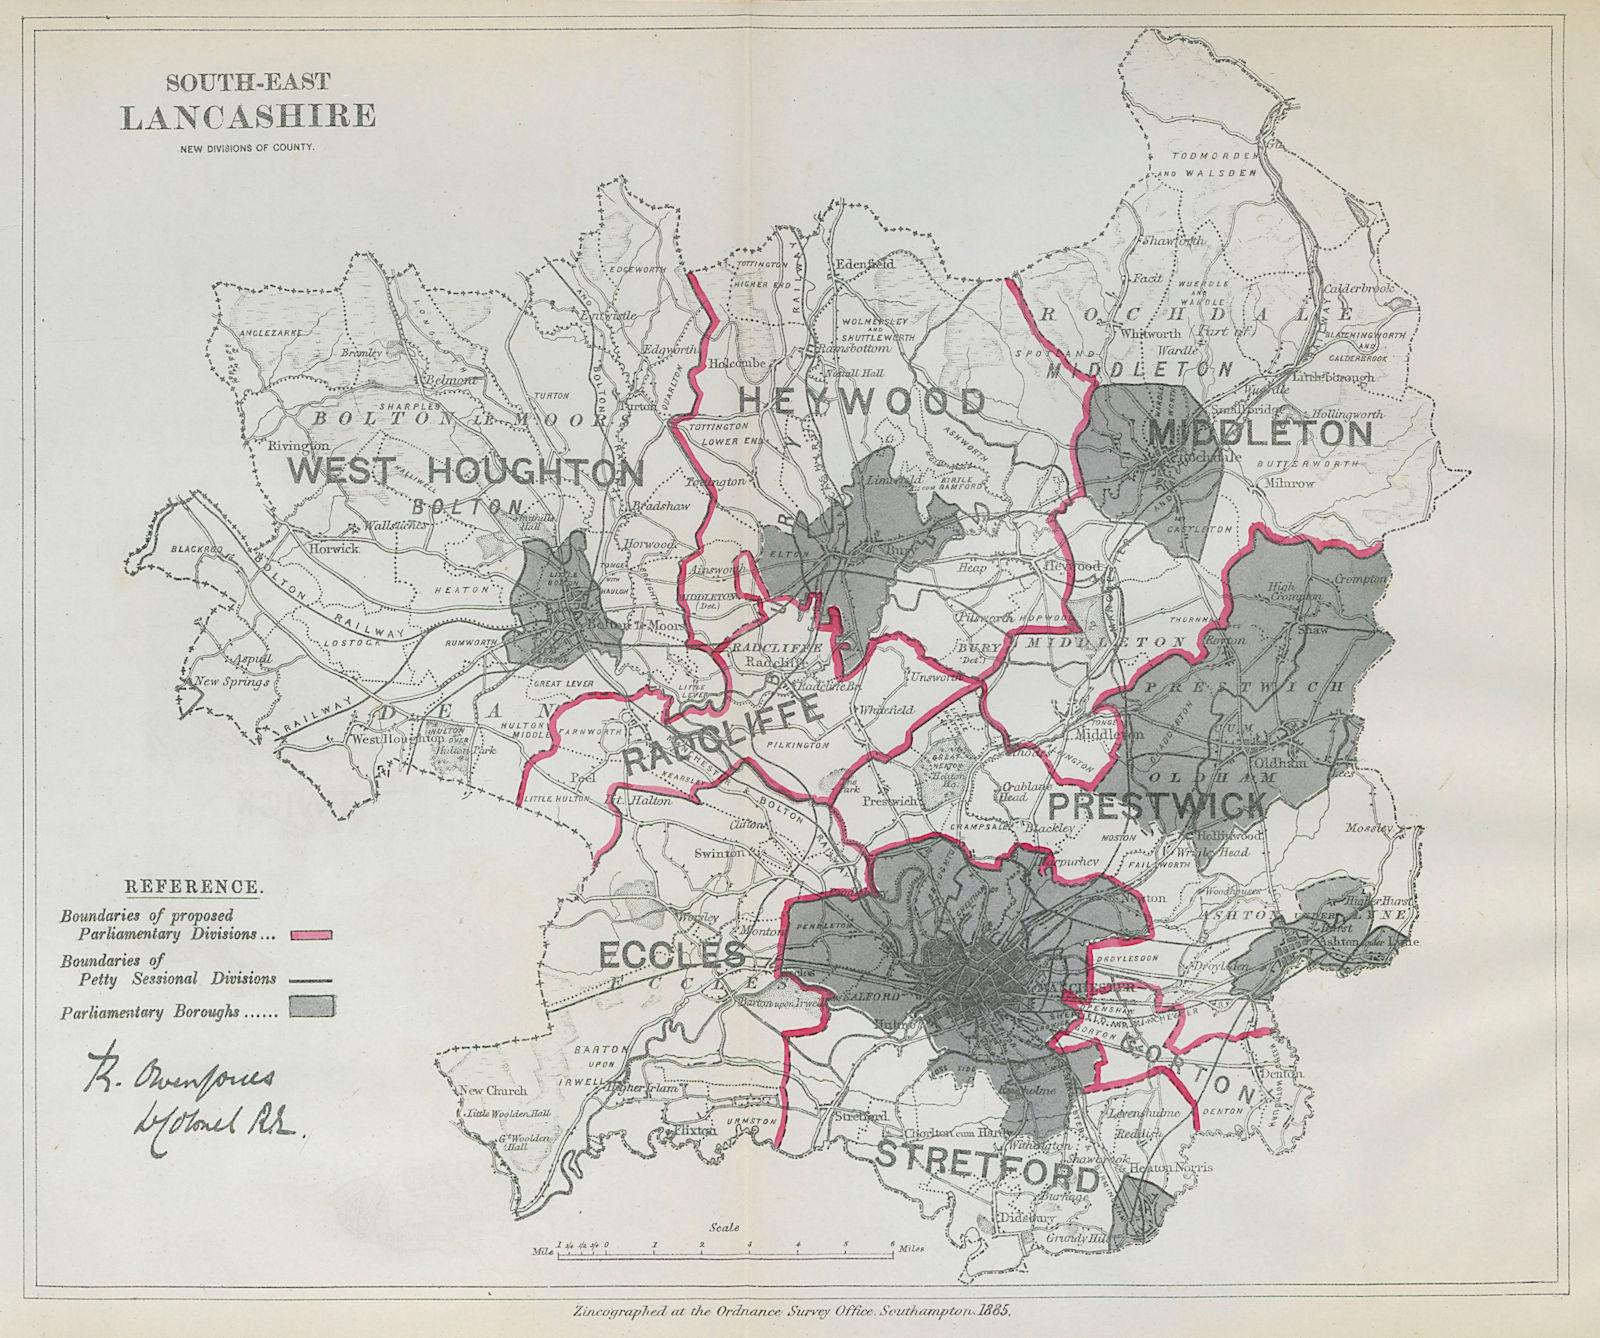 Associate Product South East Lancashire Parliamentary Divisions. BOUNDARY COMMISSION 1885 map